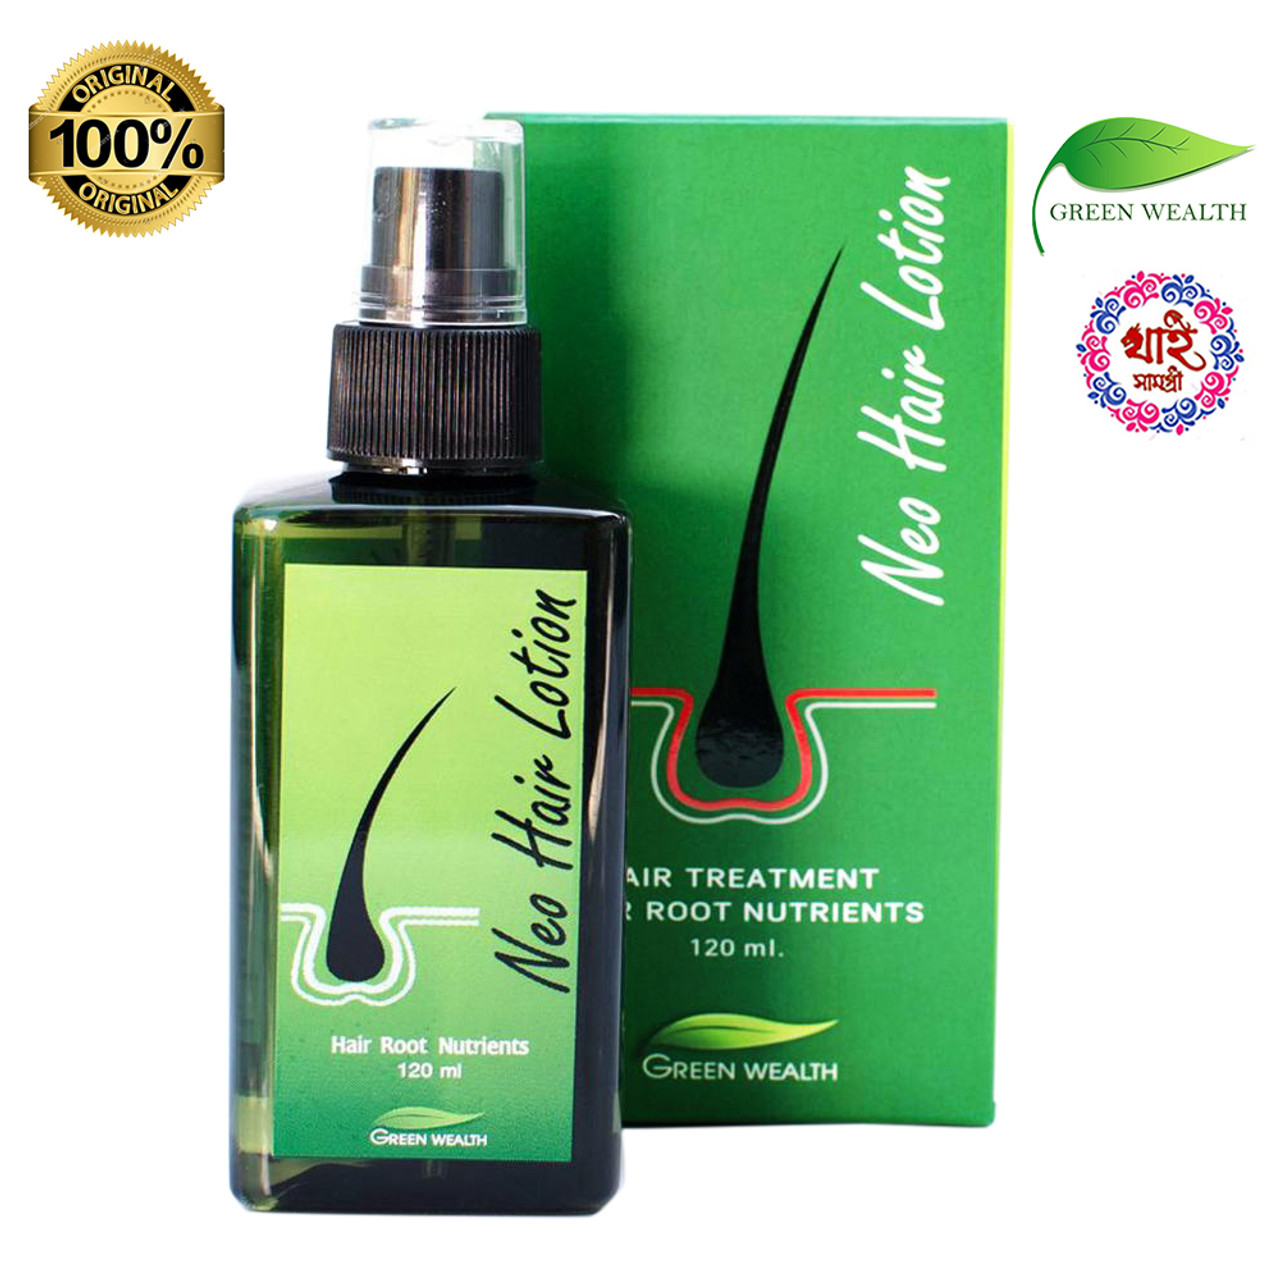 Neo Hair Lotion I 100 Effective Neo Hair Lotion For Hair Growing Oil World Best Solution